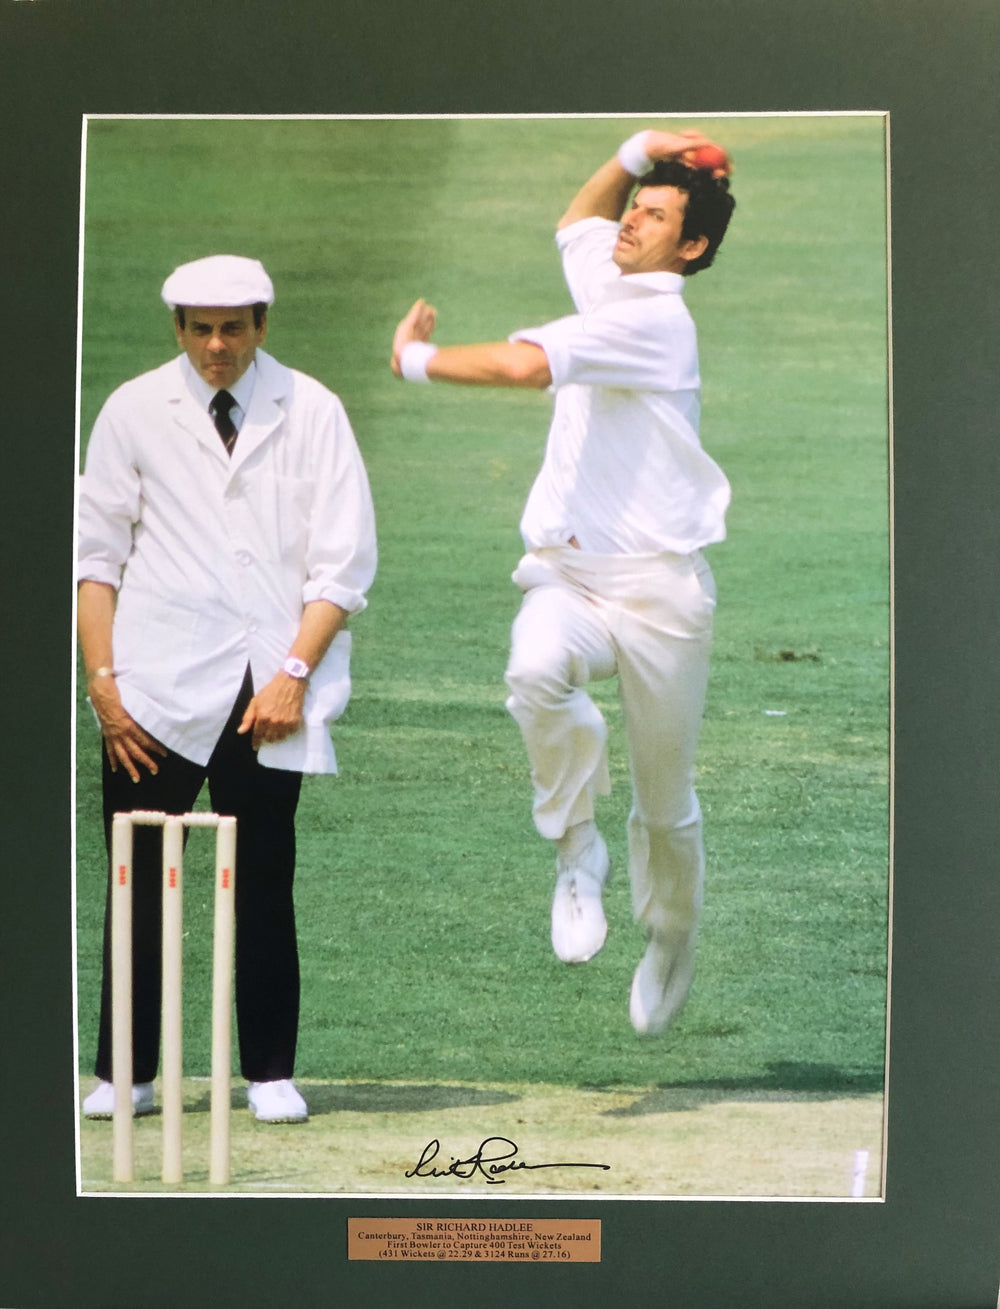 Unframed action bowling print. 'A classical delivery'